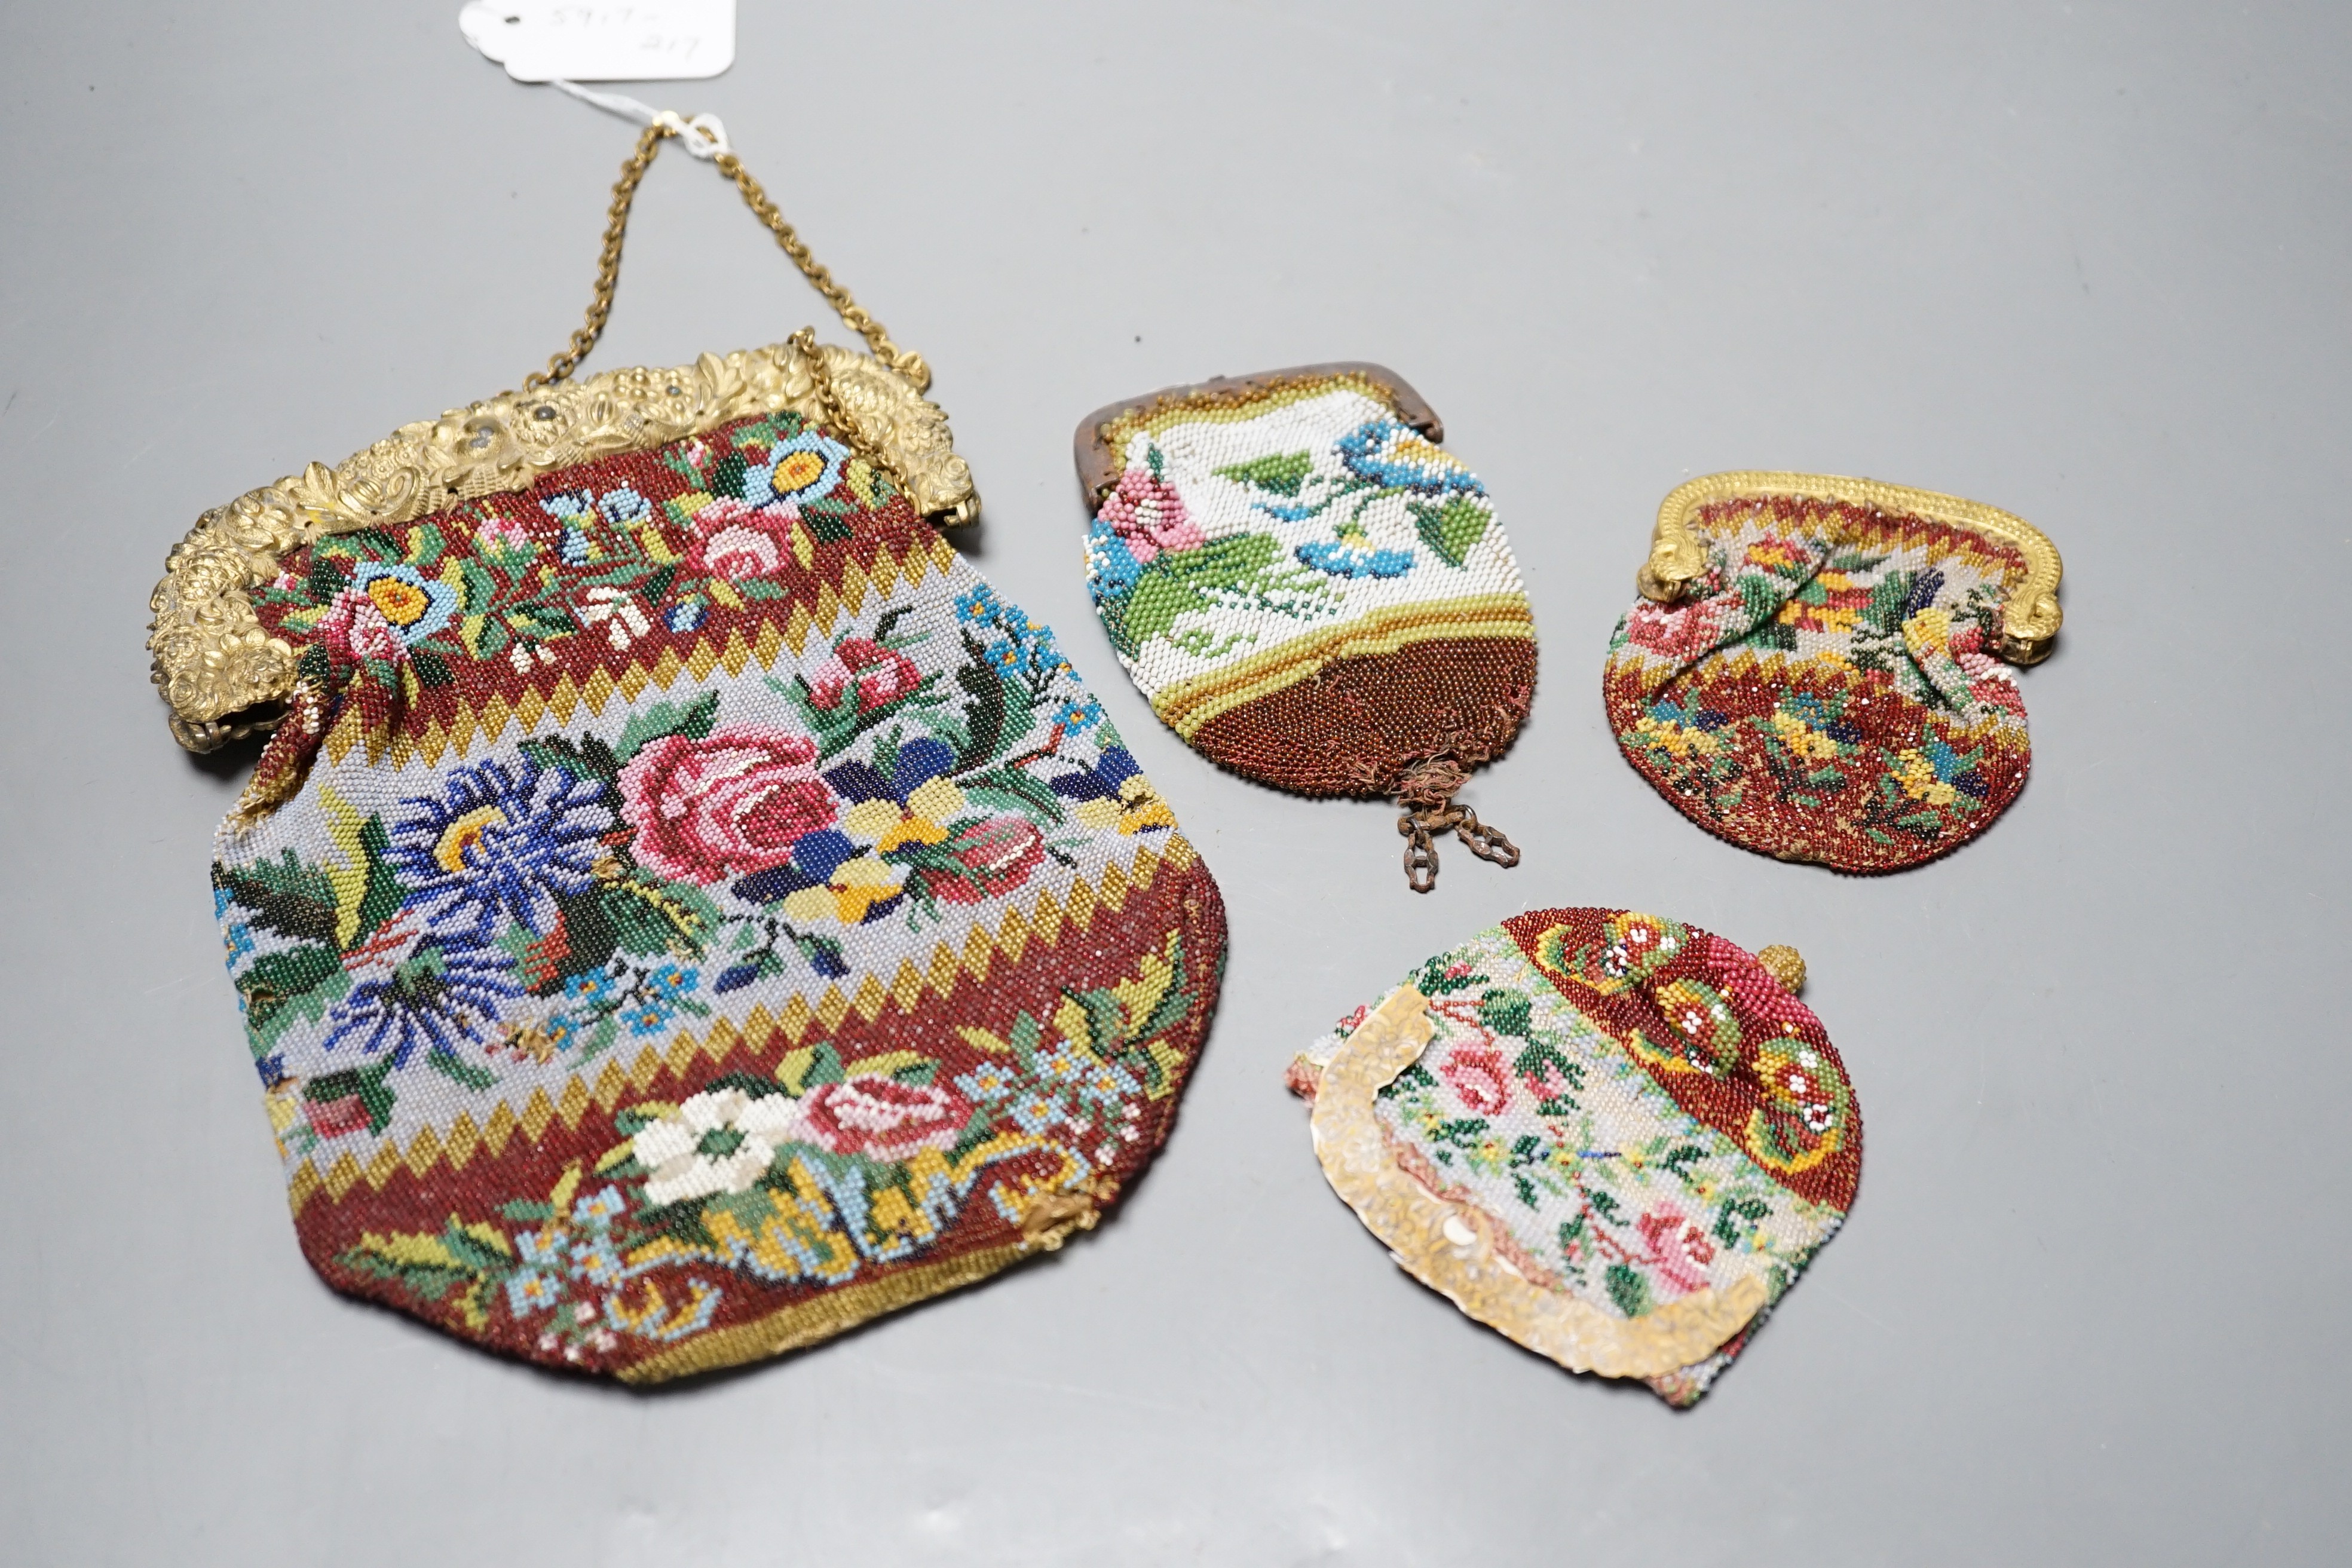 An early 19th century ornate gilt framed beaded bag with multi coloured floral design, together with three similar worked purses, gilt framed bag 20 cms high